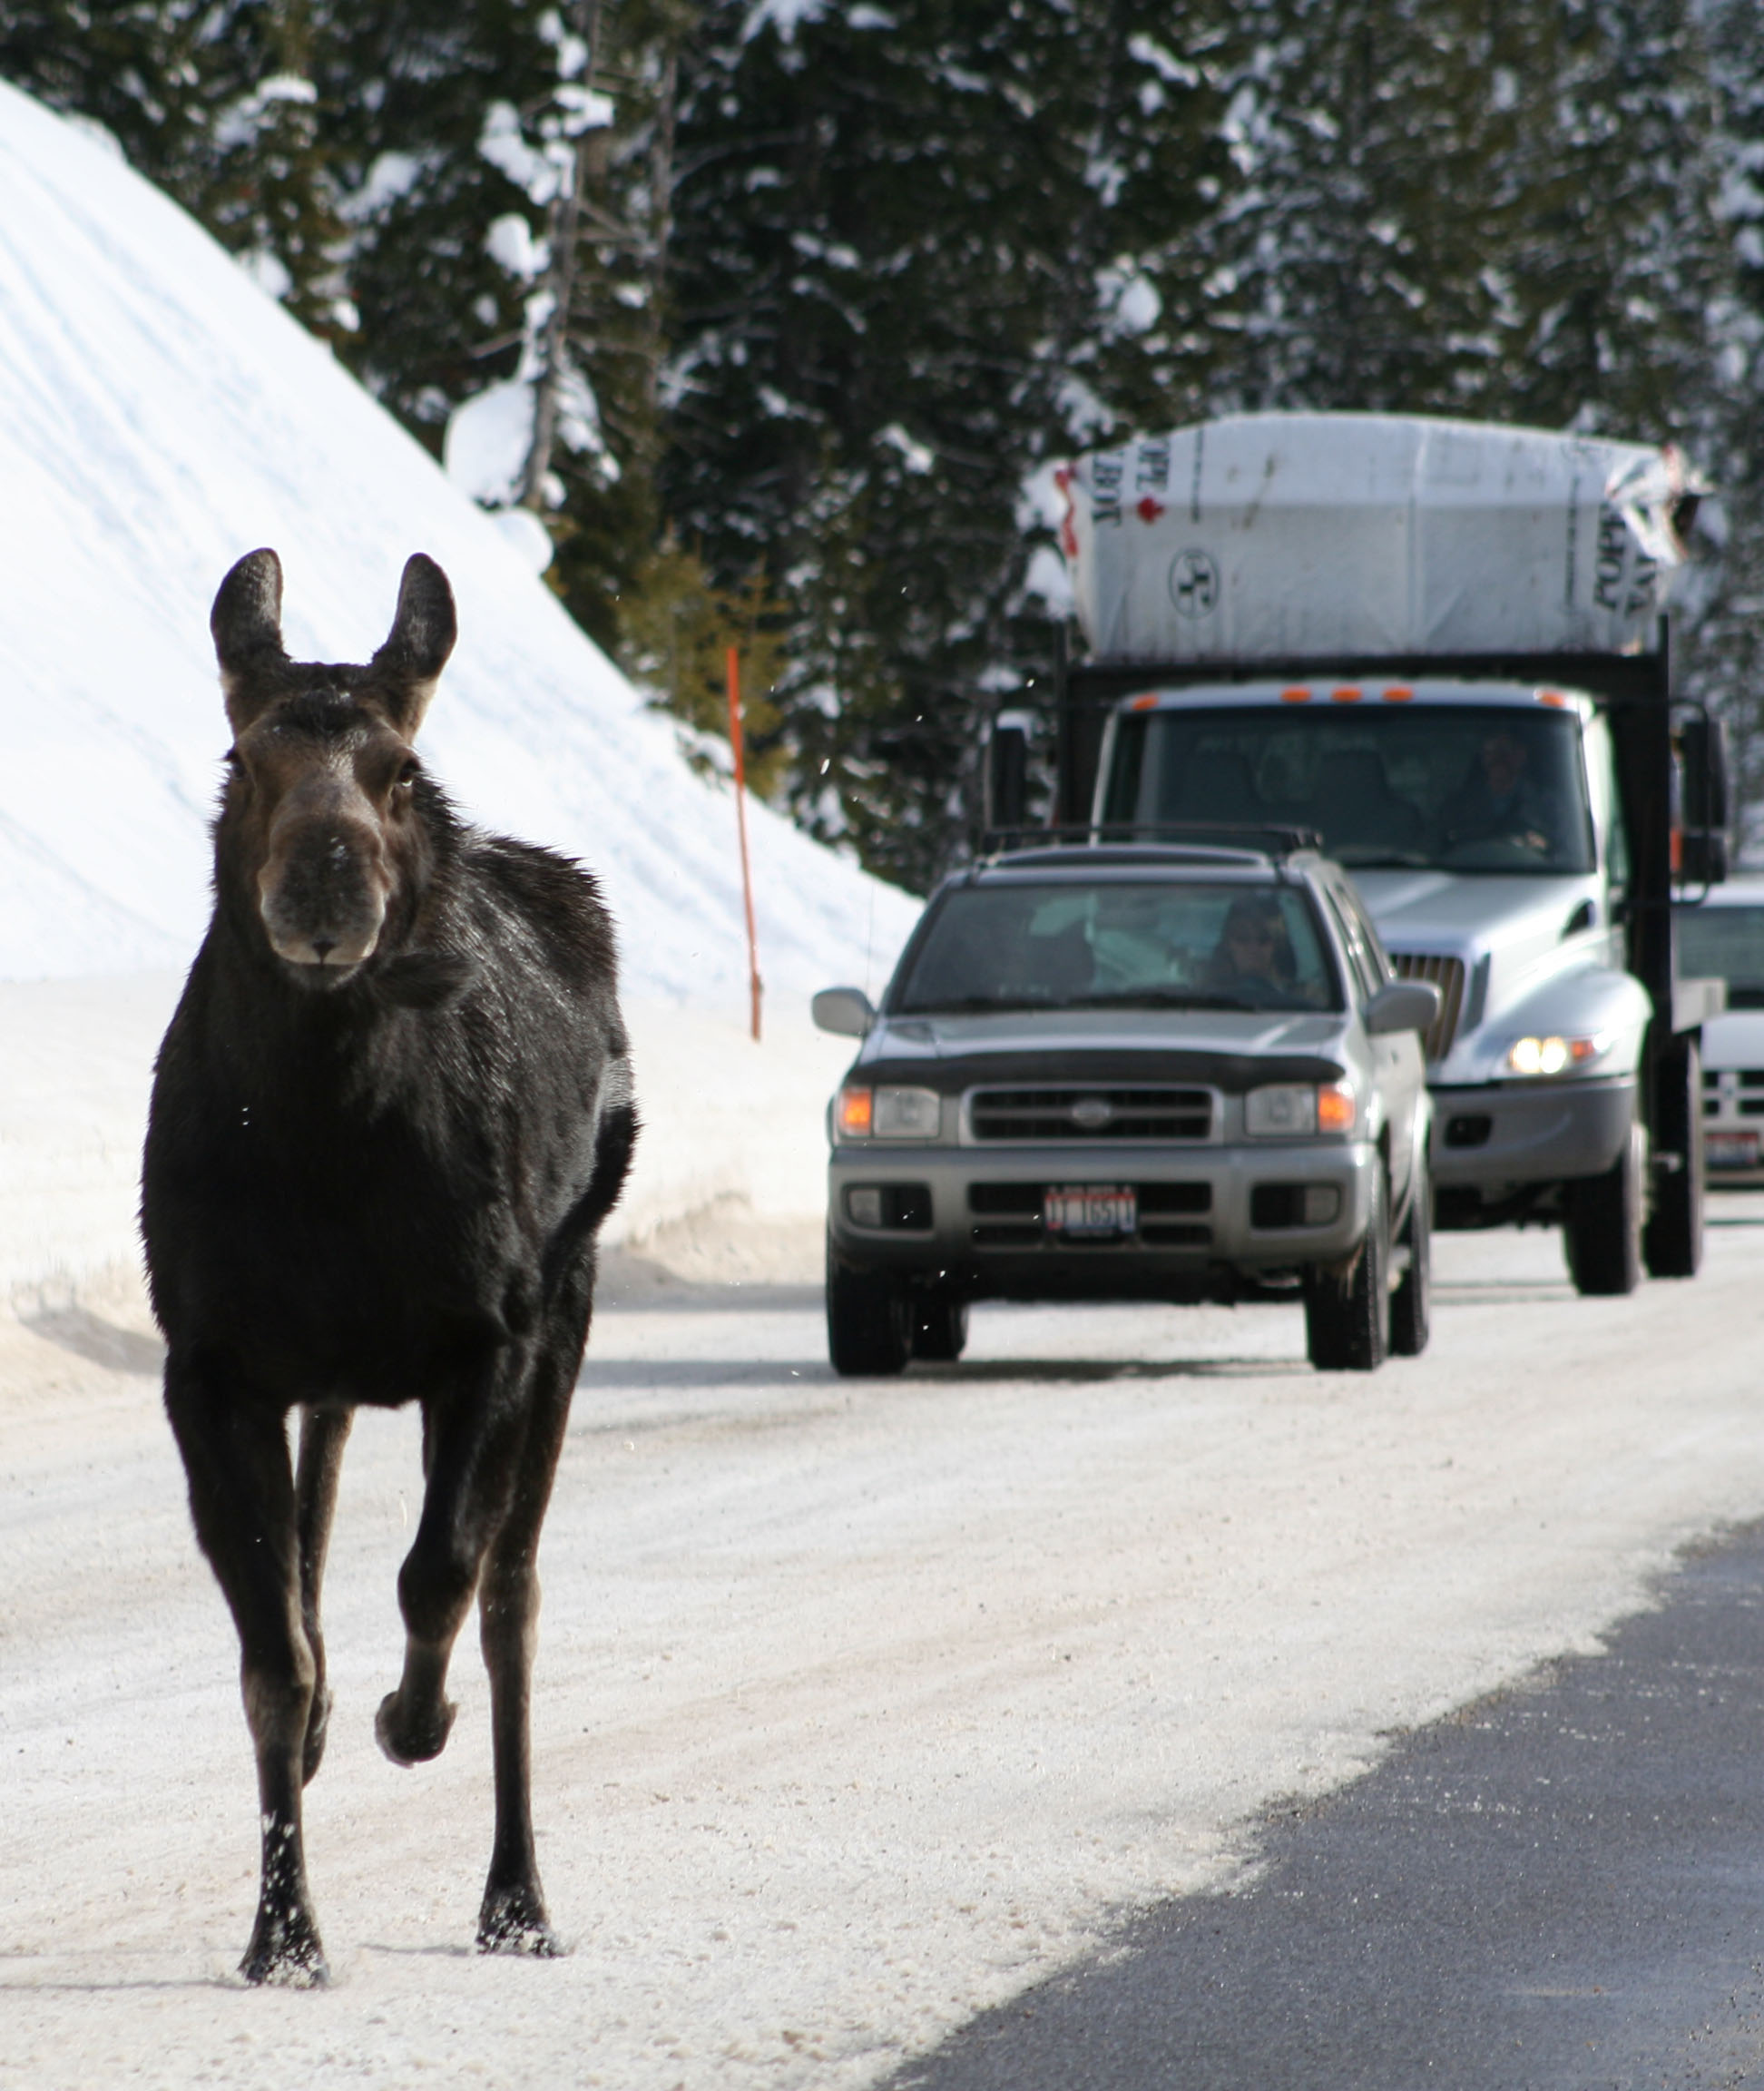 Wildlife-Vehicle Collisions for Teton County 1990-2015 All Species